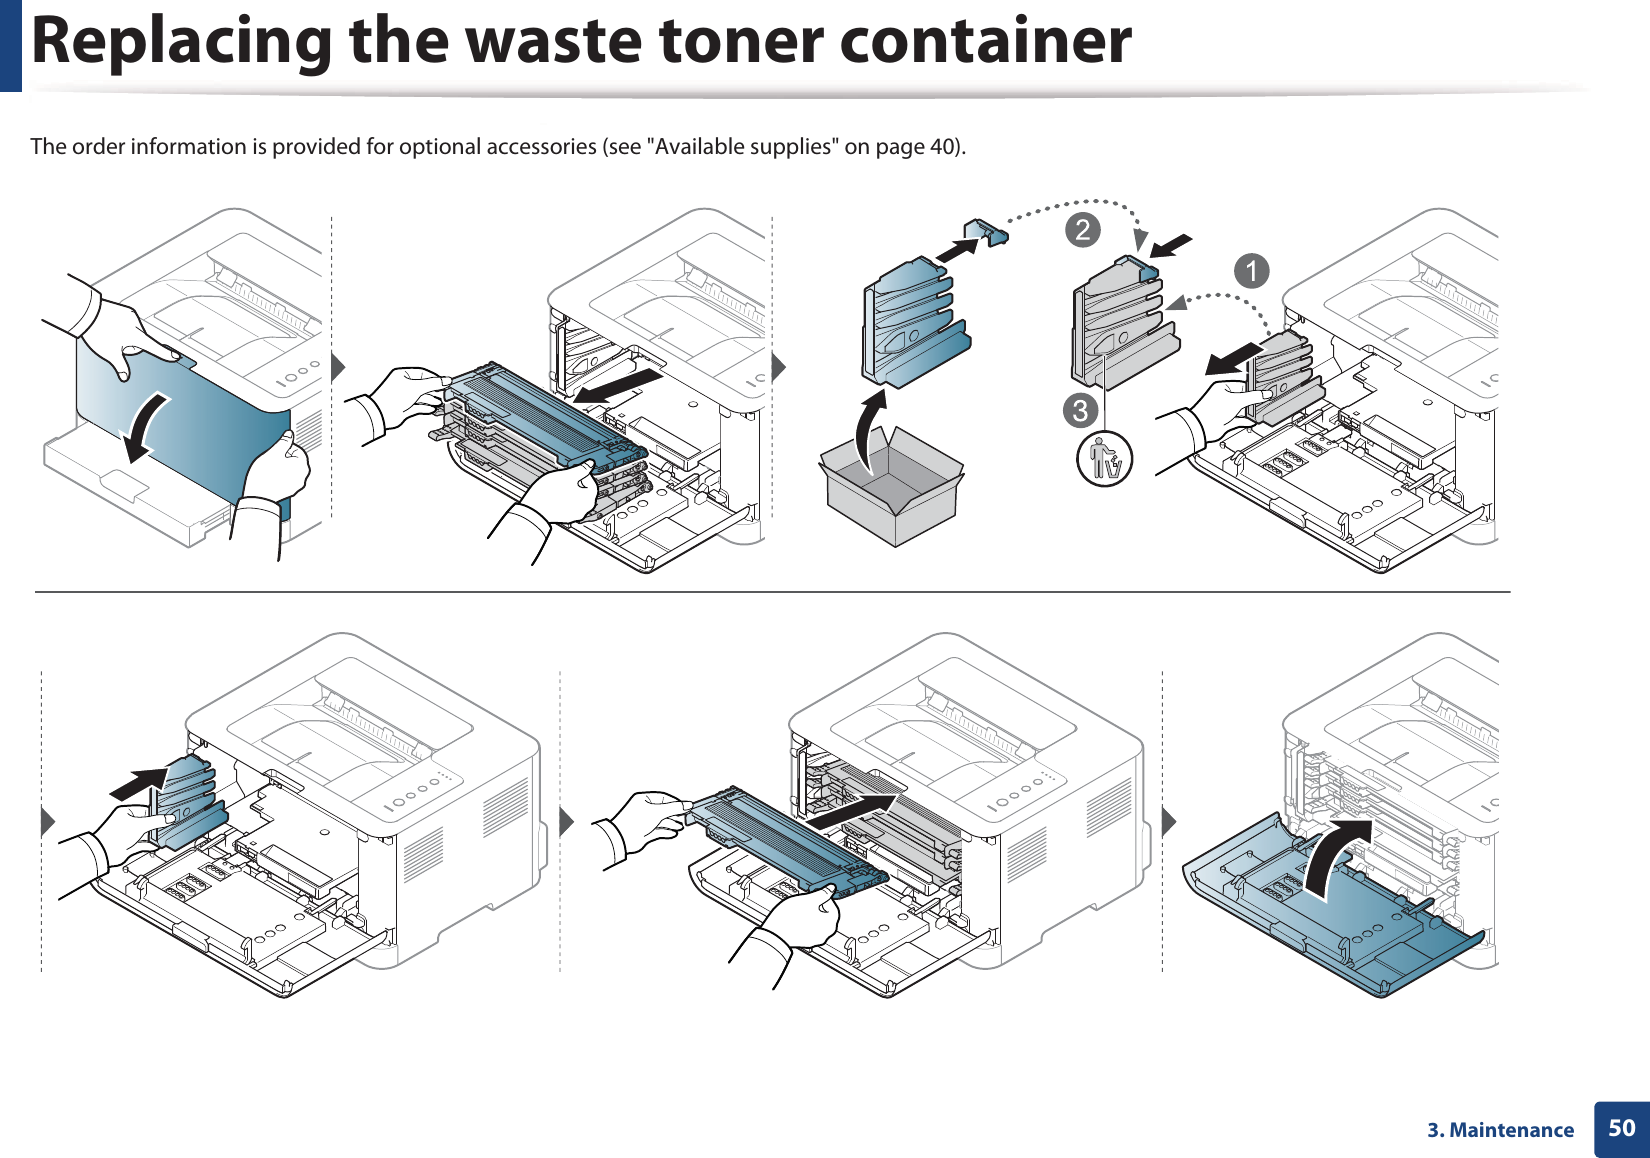 Replacing the waste toner container503. MaintenanceThe order information is provided for optional accessories (see &quot;Available supplies&quot; on page 40).